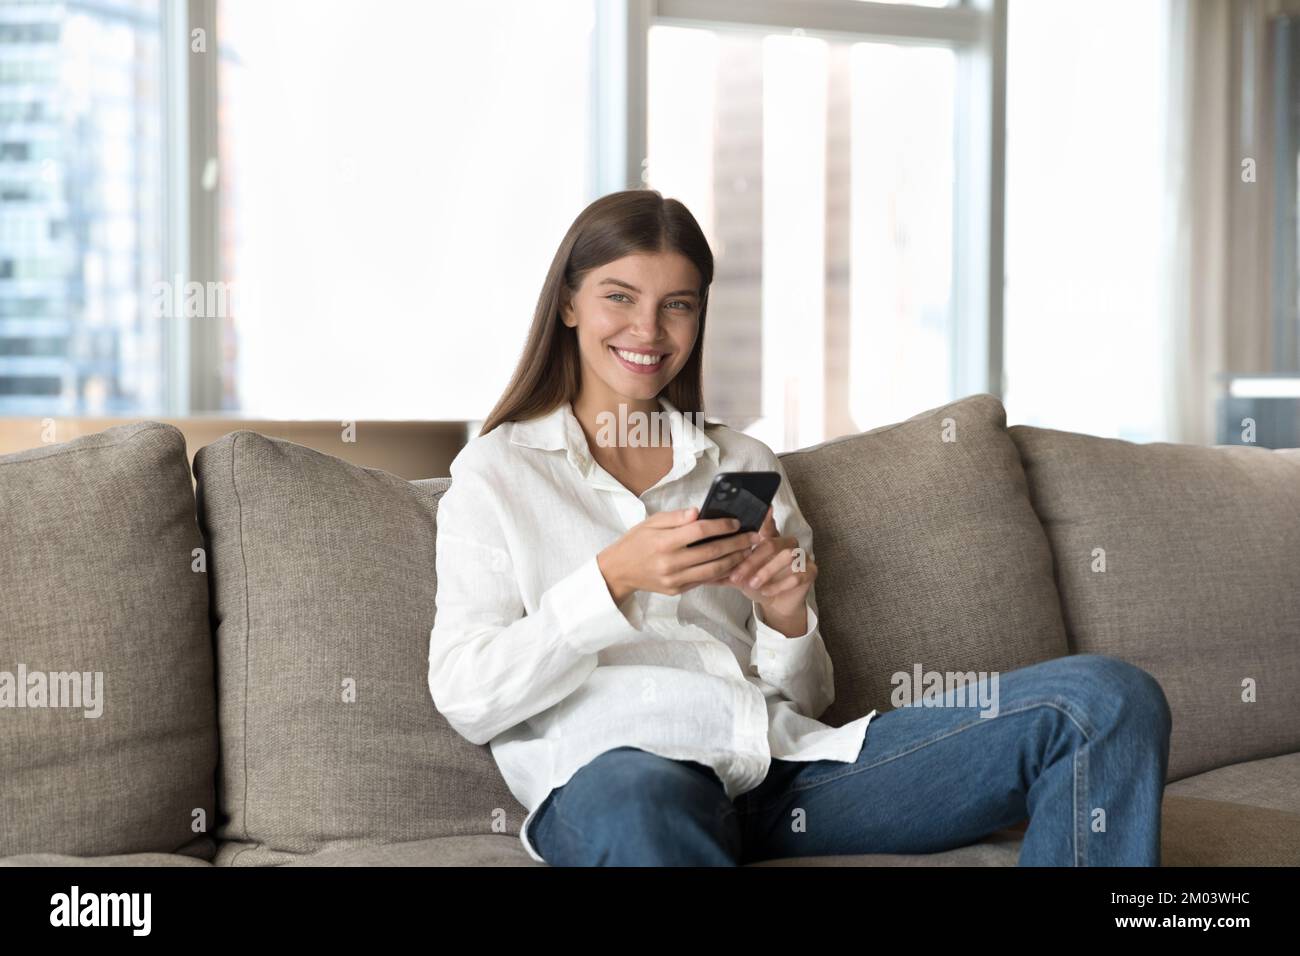 Happy positive young cellphone user woman sitting on home sofa Stock Photo